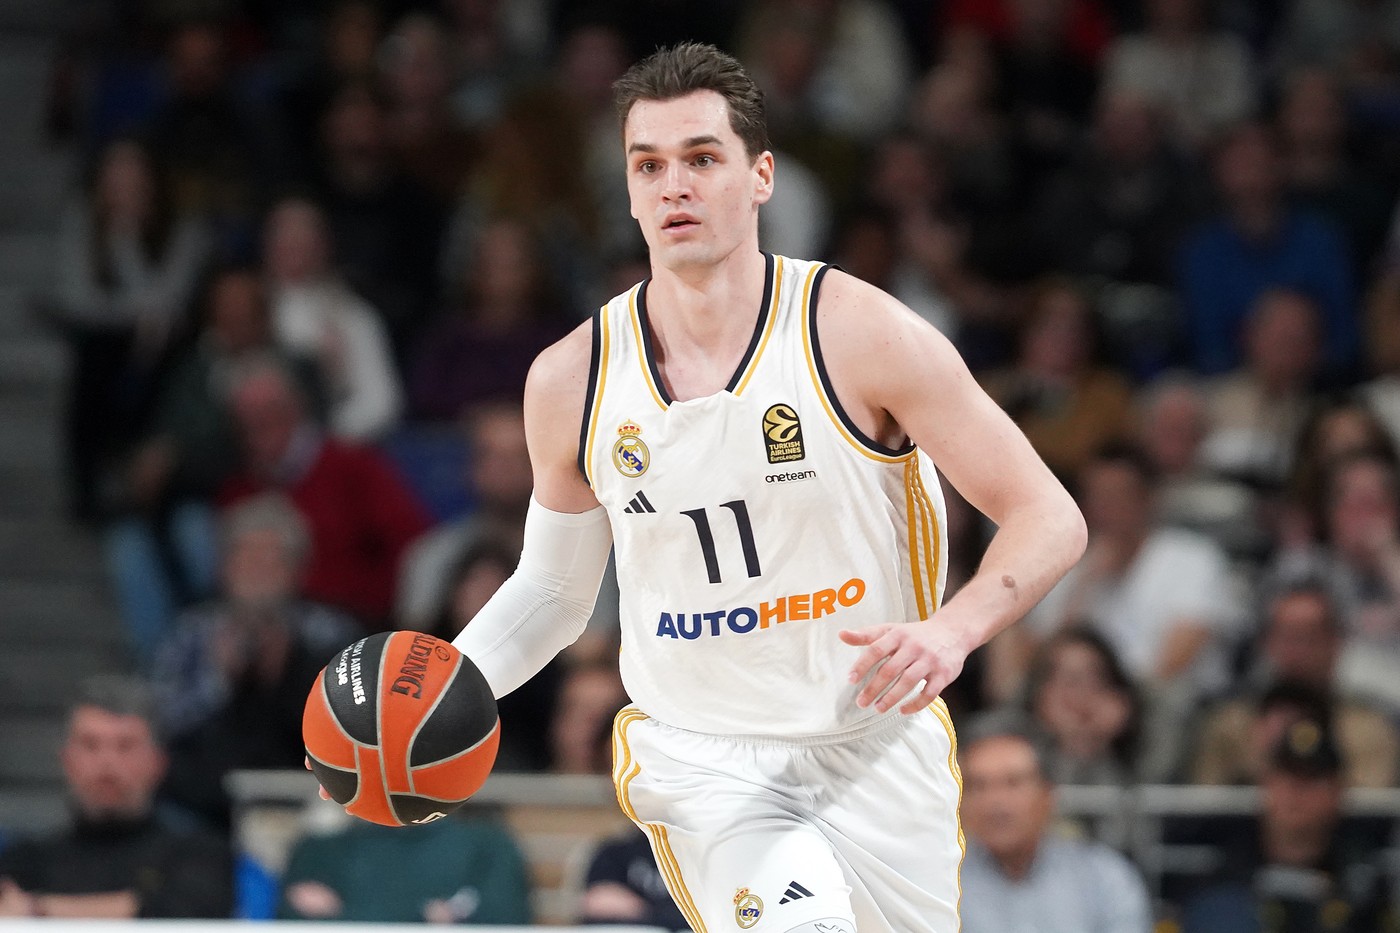 Real Madrid's Mario Hezonja during Euroleague match, Regular Season, Round 32. March 29, 2024.,Image: 861311150, License: Rights-managed, Restrictions: *** World Rights Except France, Germany, Japan, and Spain *** DEUOUT ESPOUT FRAOUT JPNOUT, Model Release: no, Credit line: Alter Photos / ddp USA / Profimedia